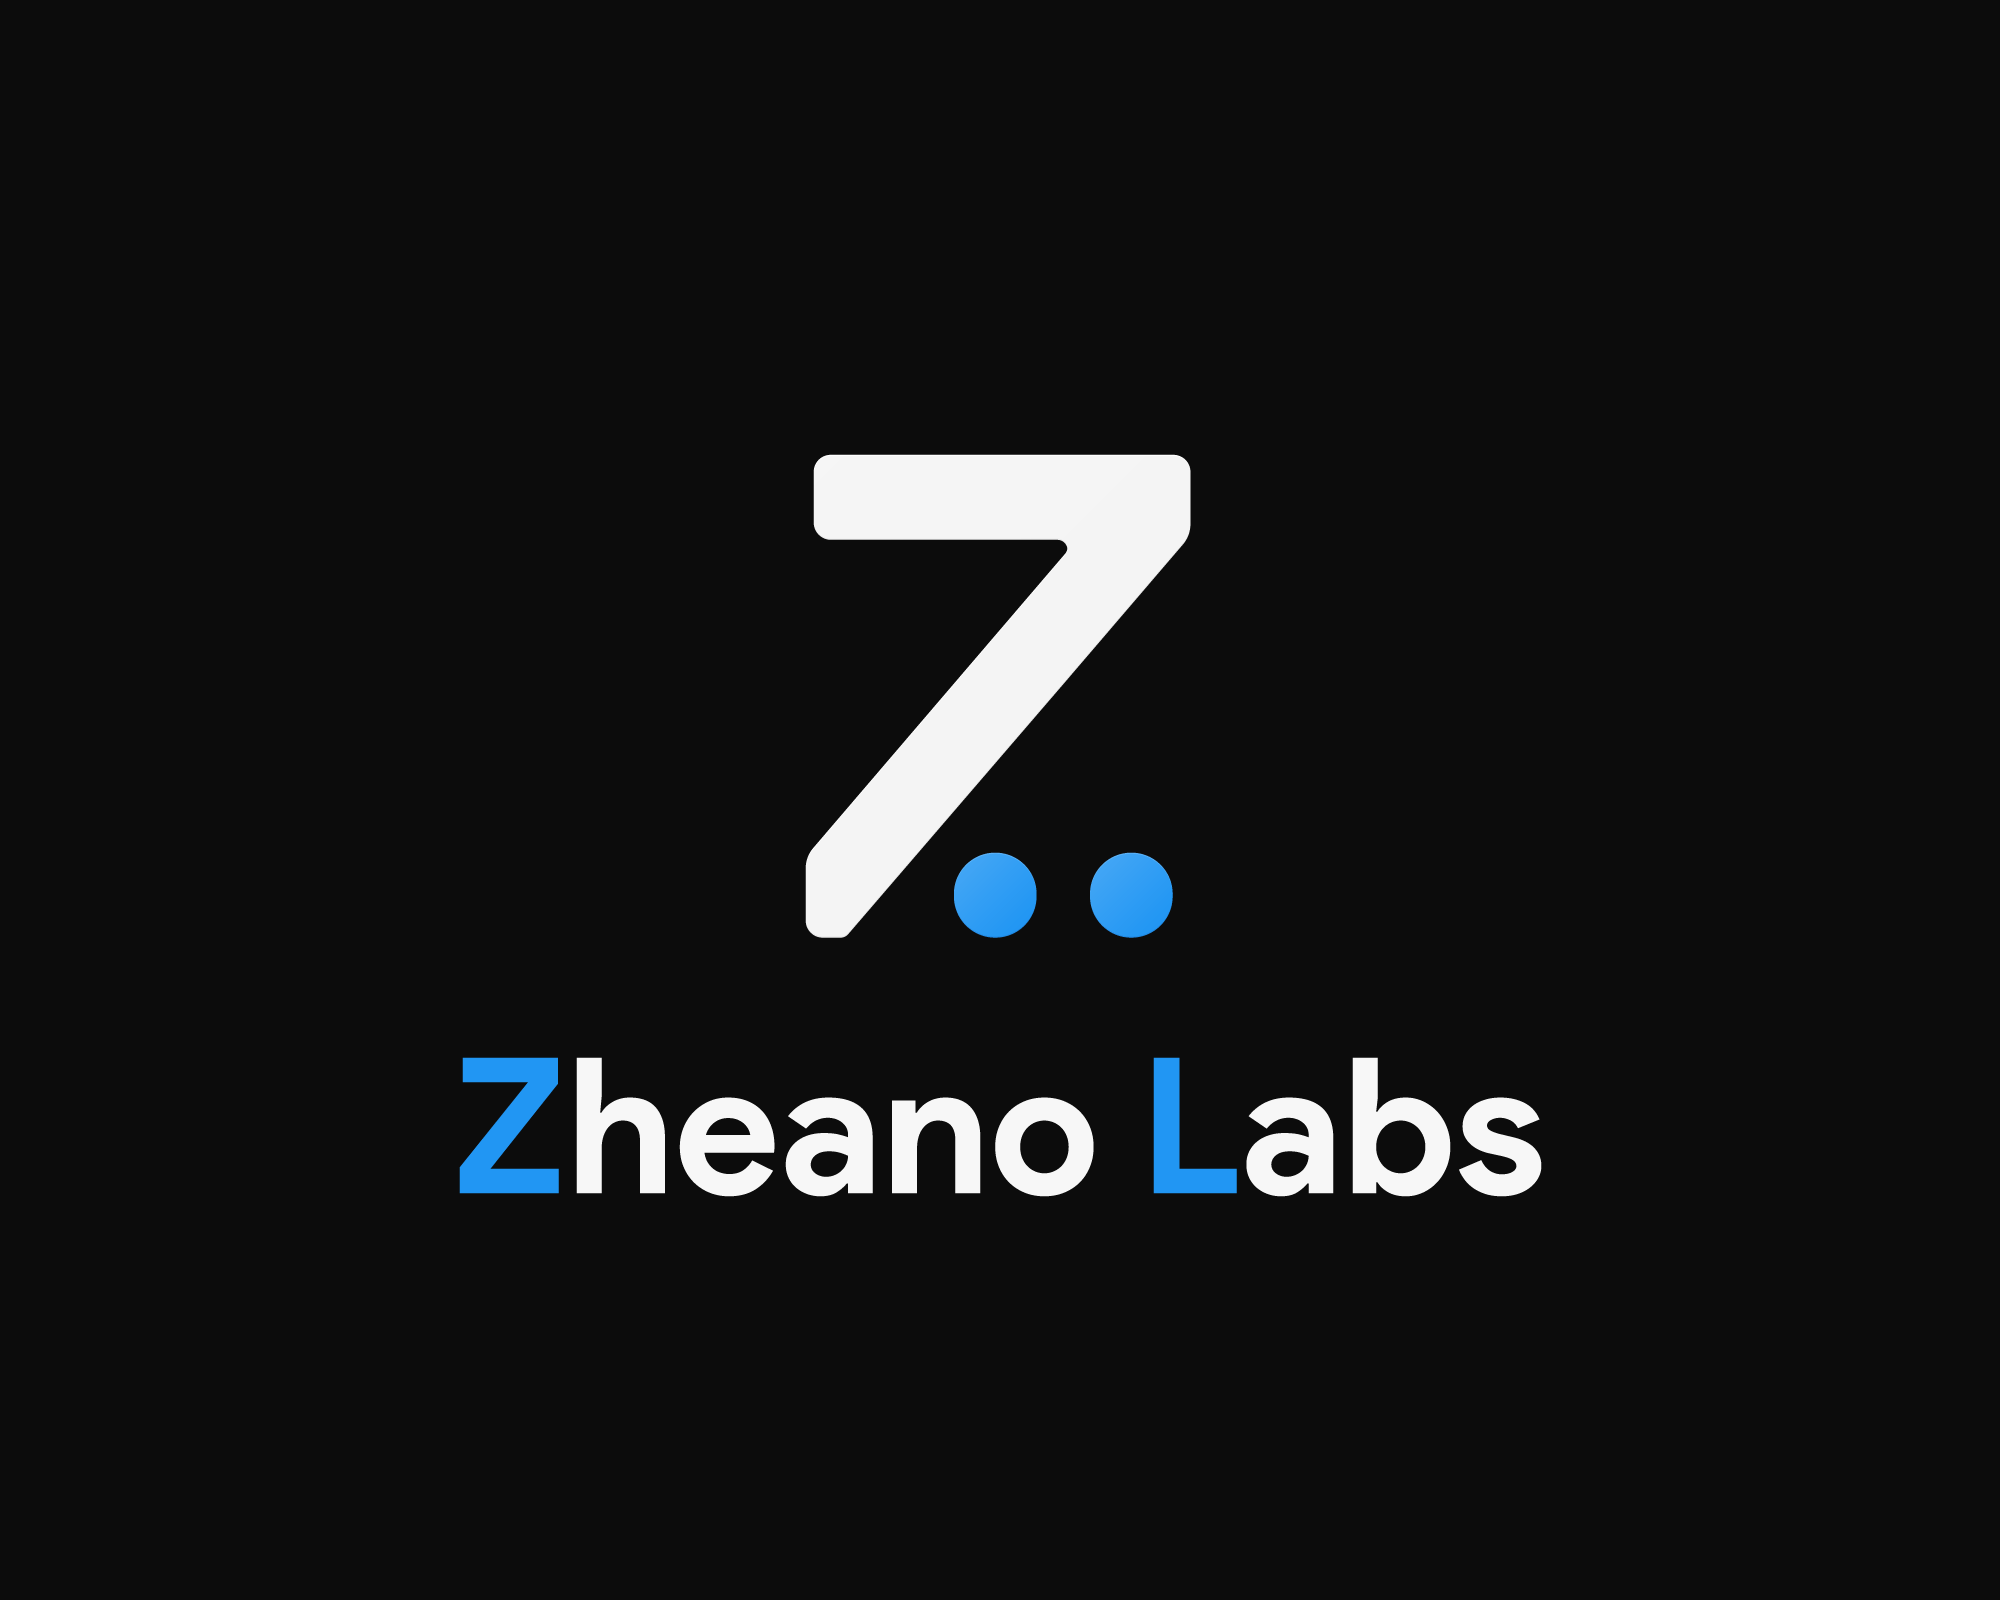 WSW: Zheano Labs